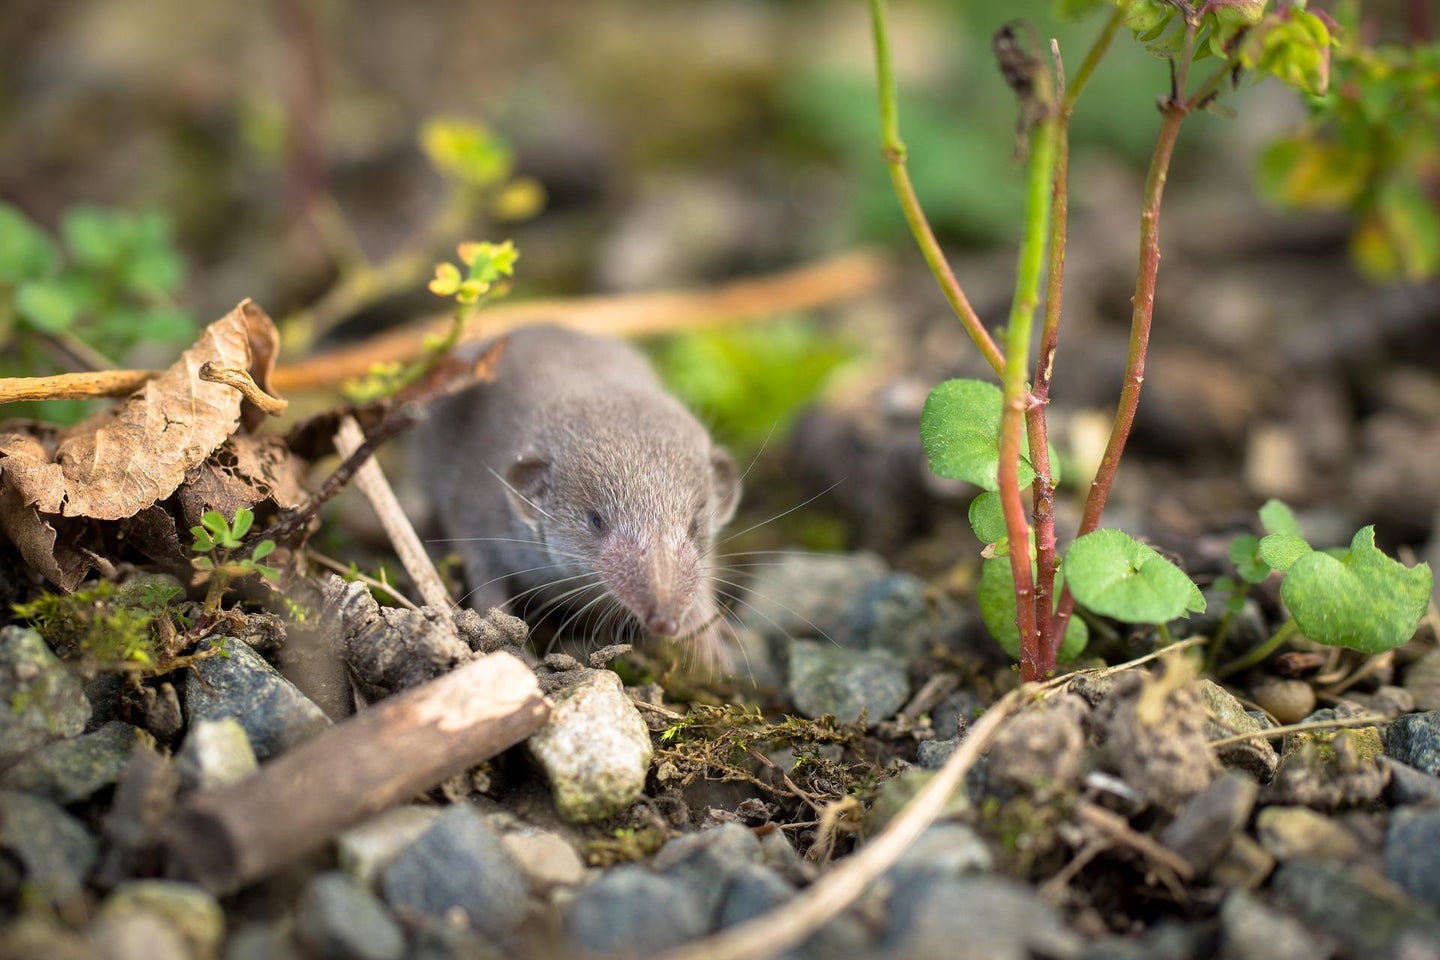 Shrew on the forest floor.